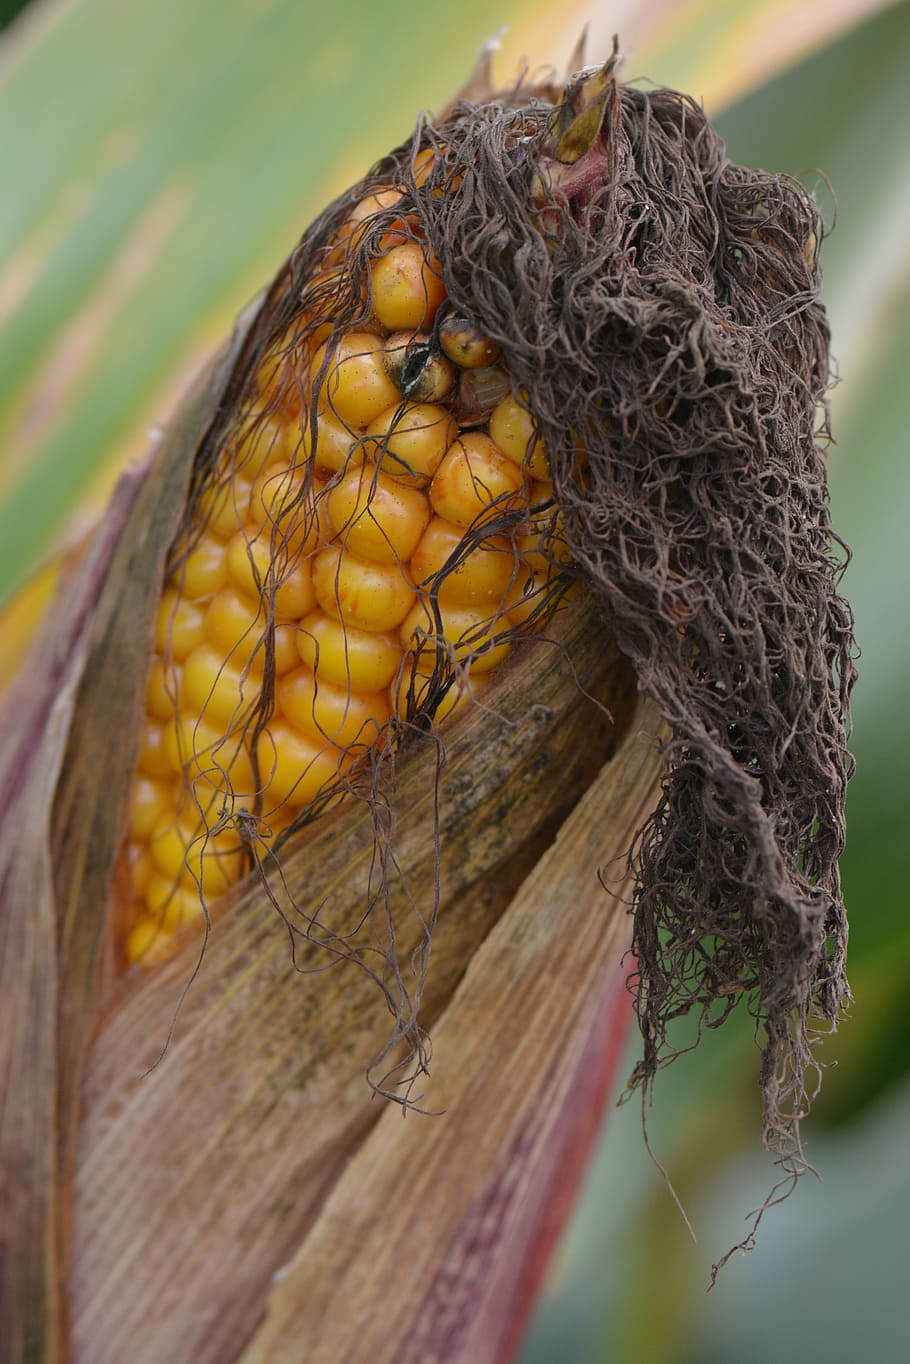 corn, flask, vegetable, nature, close-up, animals in the wild, animal wildlife, animal themes, day, animal